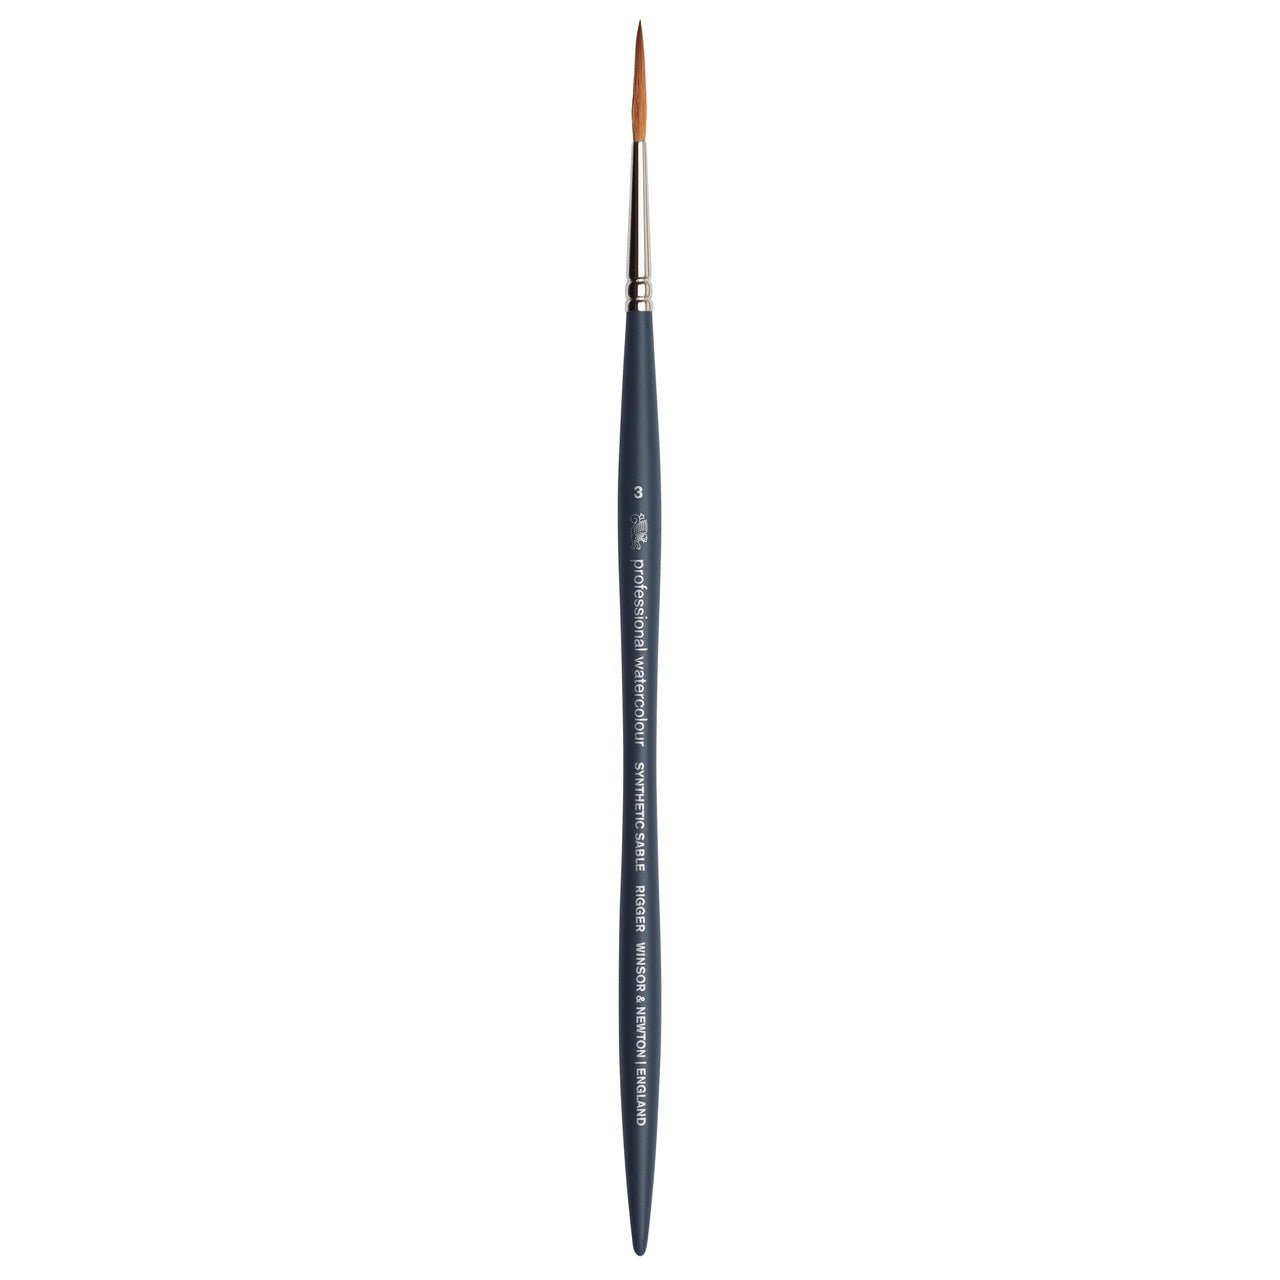 Winsor & Newton Professional Watercolor Synthetic Sable Brush - Rigger 3 - merriartist.com